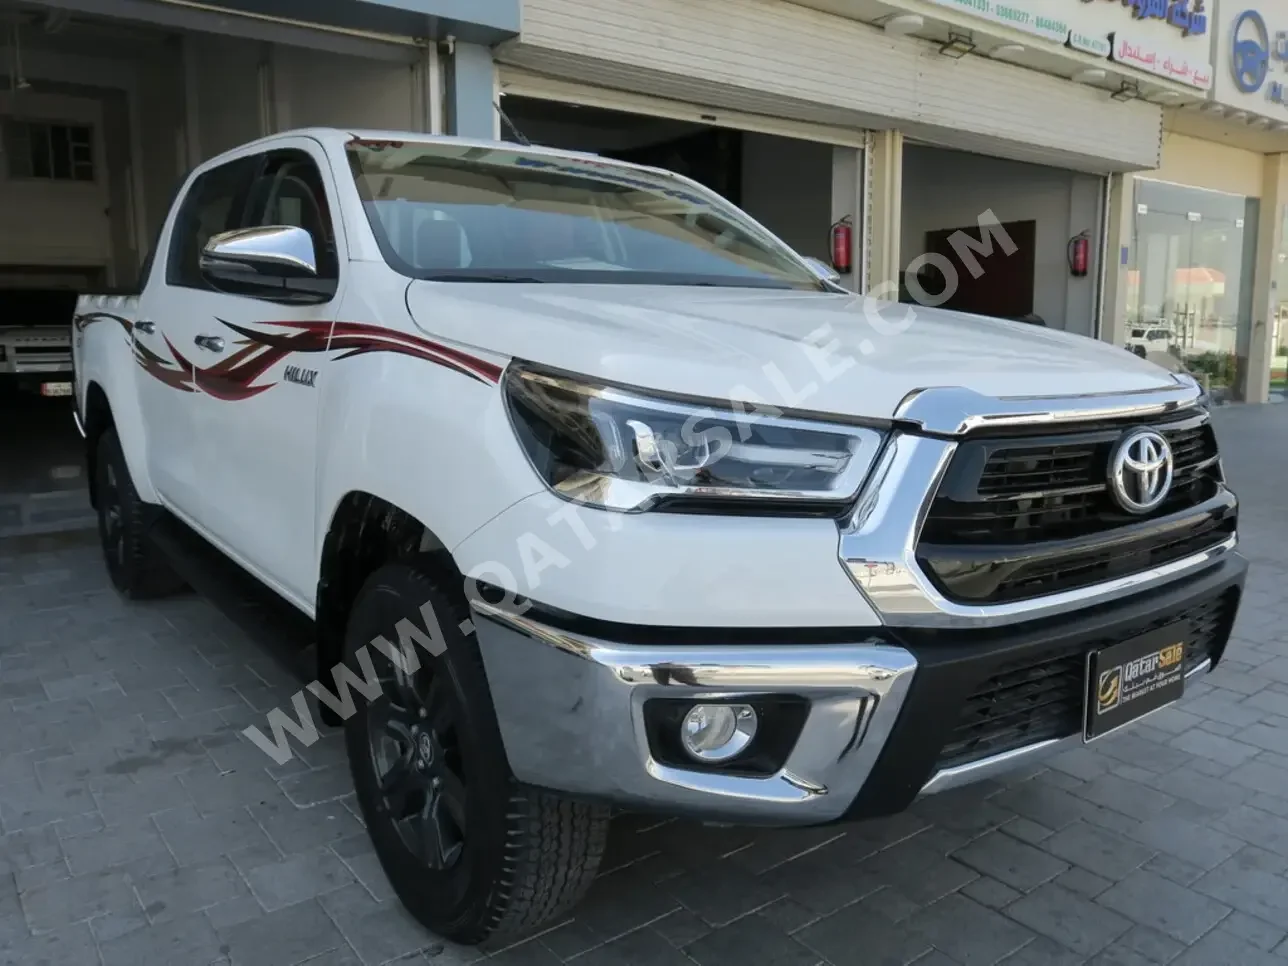 Toyota  Hilux  2022  Manual  15,000 Km  4 Cylinder  Four Wheel Drive (4WD)  Pick Up  White  With Warranty